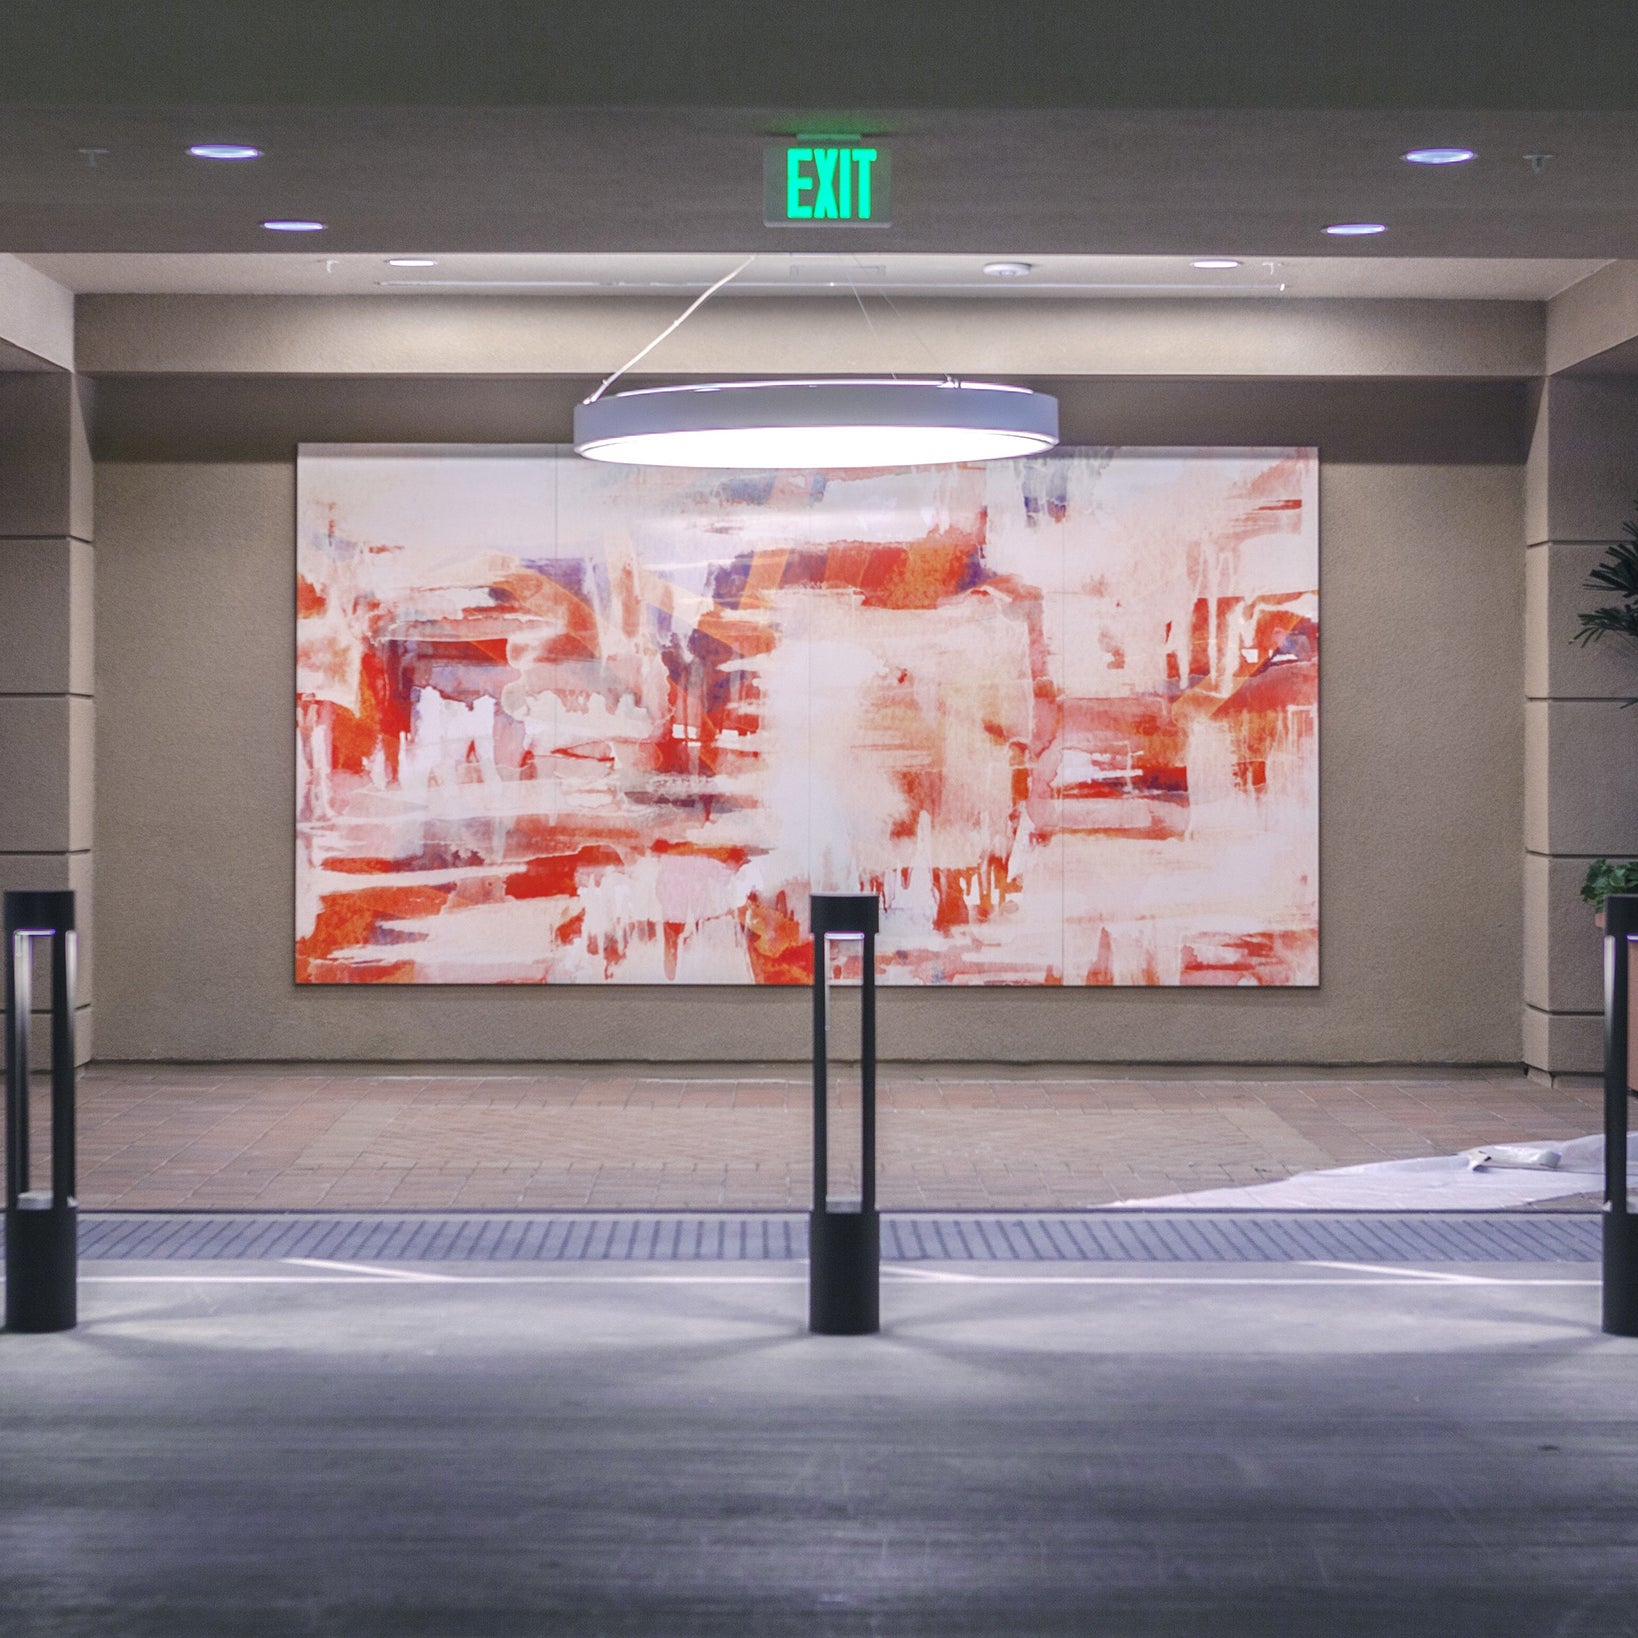 Centerpointe motor court with a captivating abstract painting in red and white hues, under a circular light fixture, combining urban design with artistic flair.